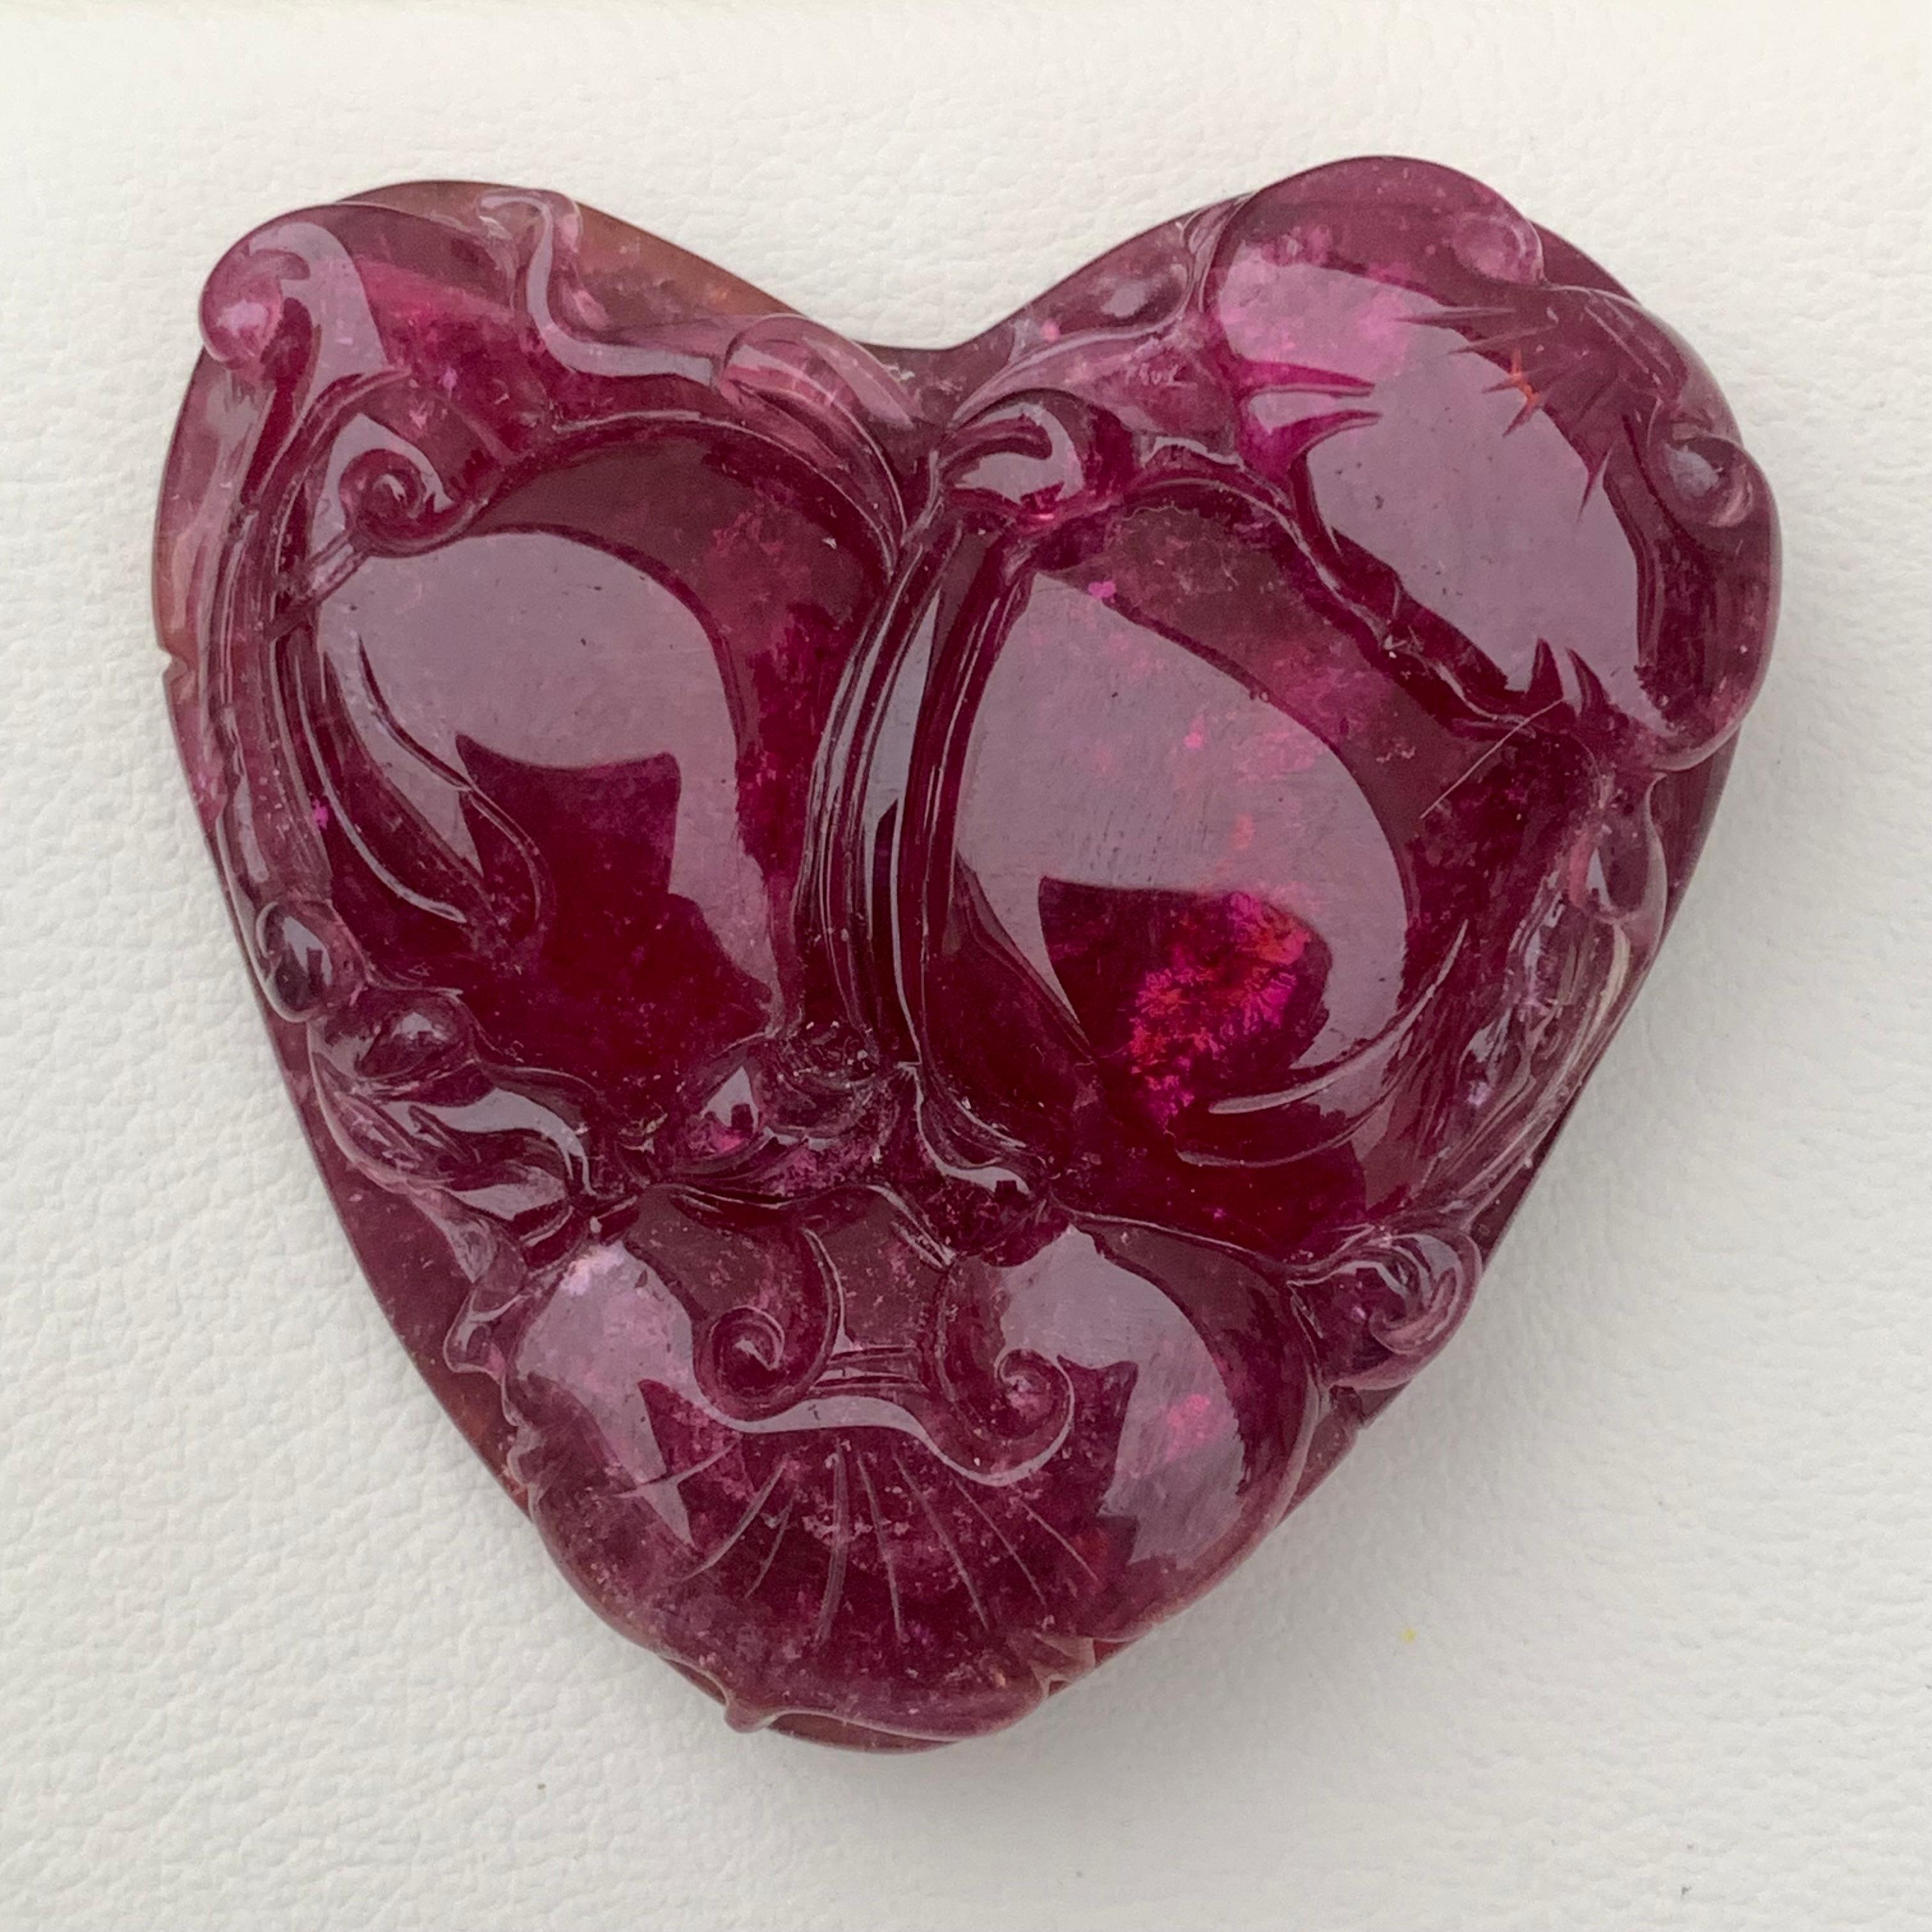 Heart Cut Huge 197.45 Carat Natural Rubellite Tourmaline Carving Gemstone from Africa For Sale